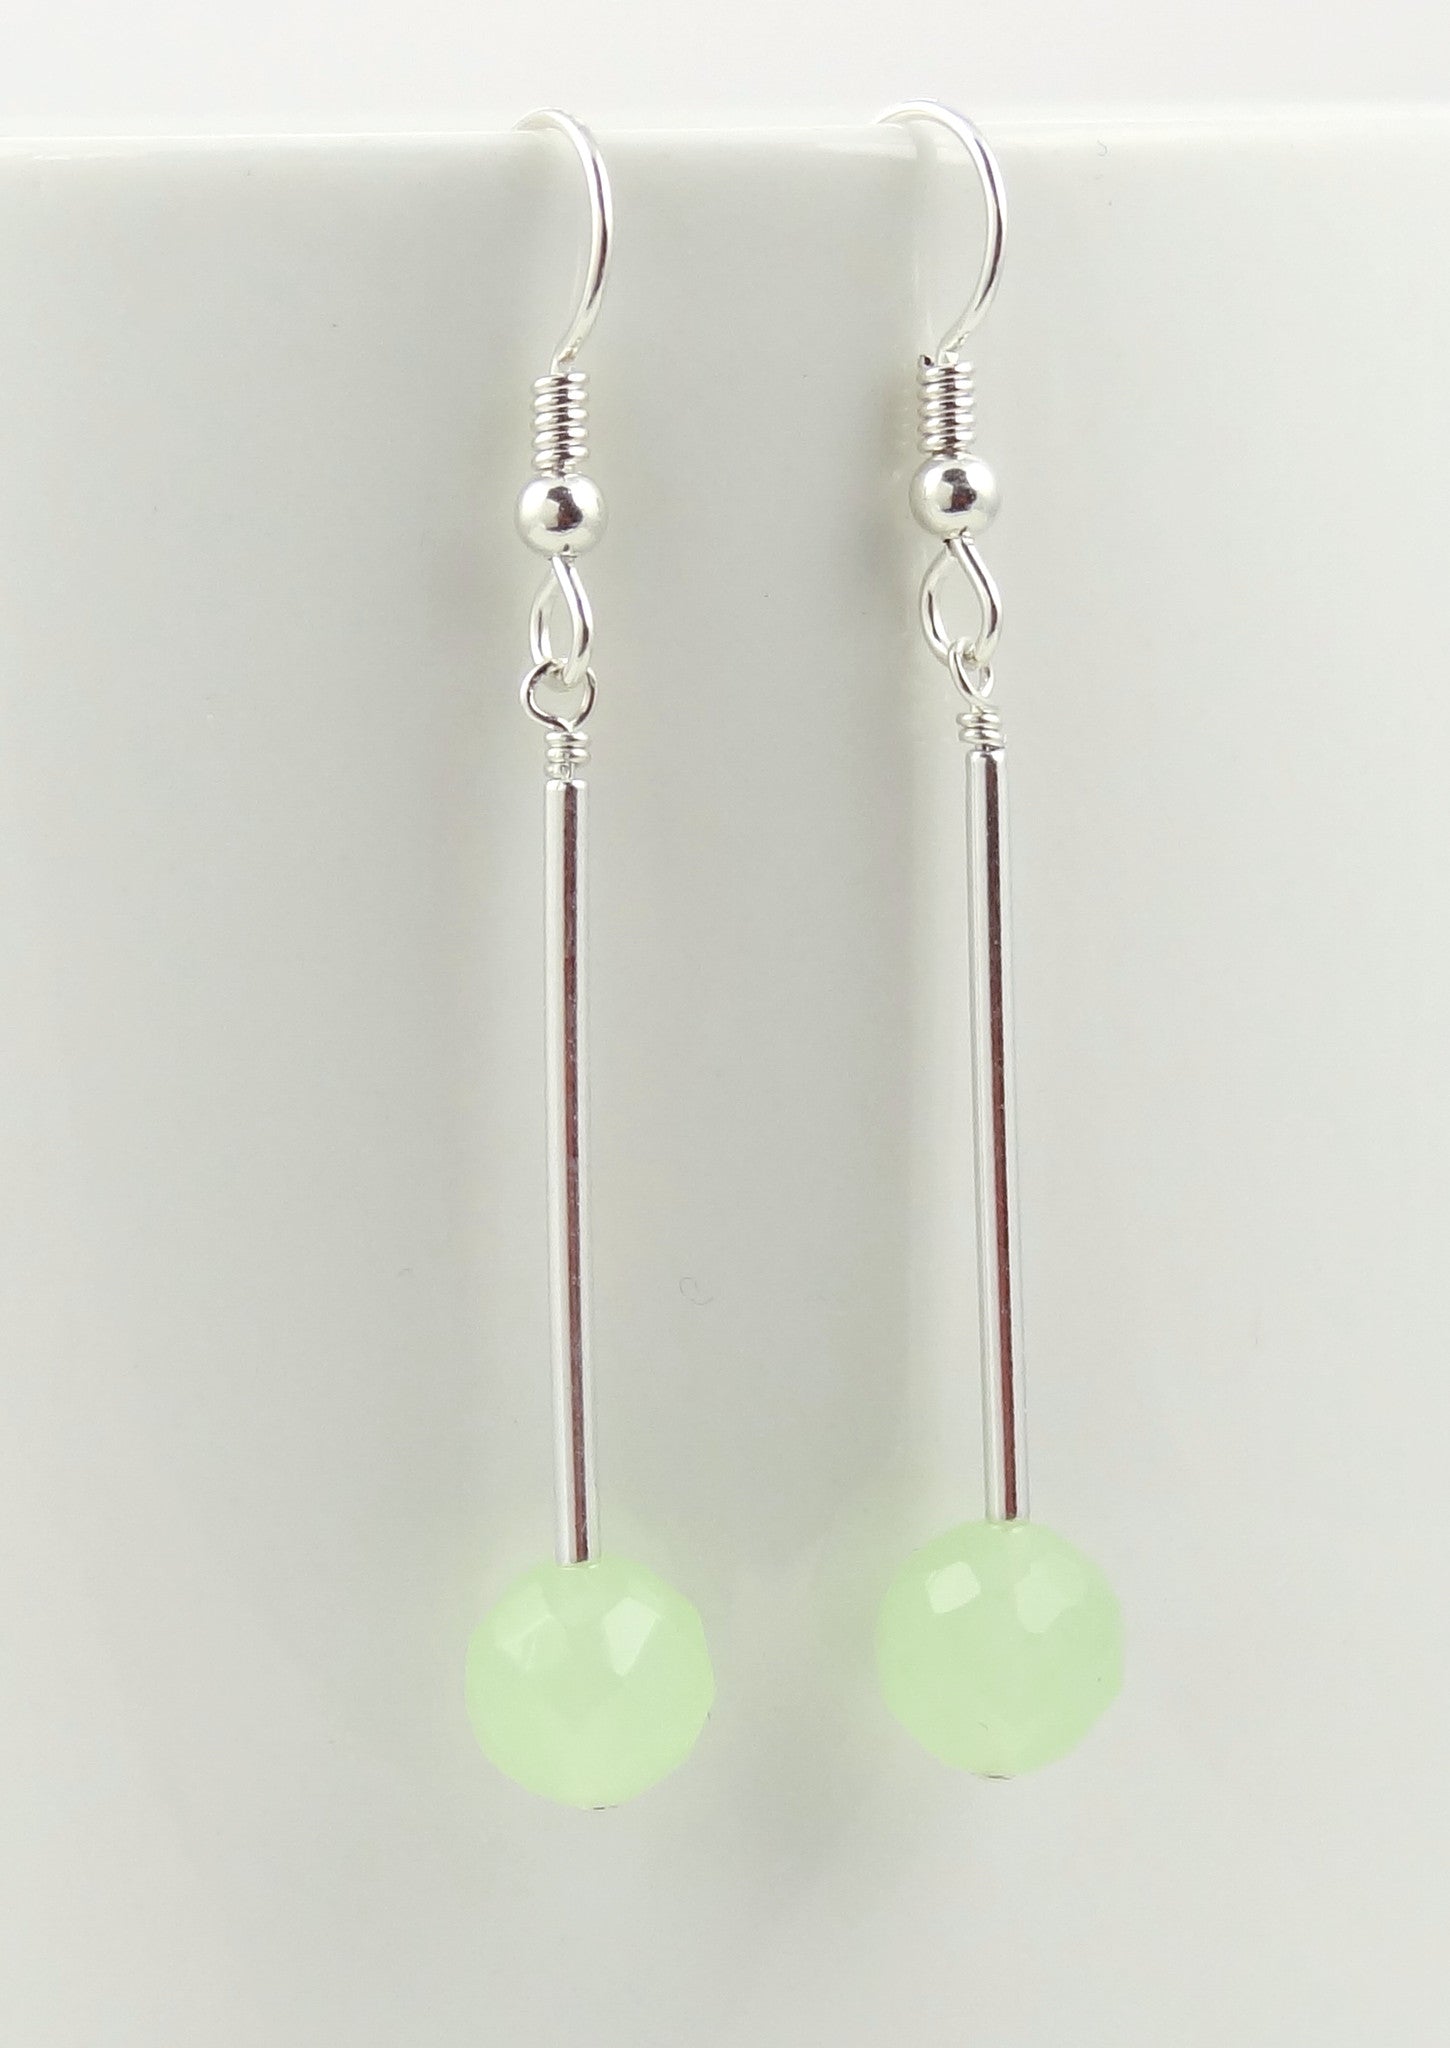 Minimalist Faceted Spring Green Earrings